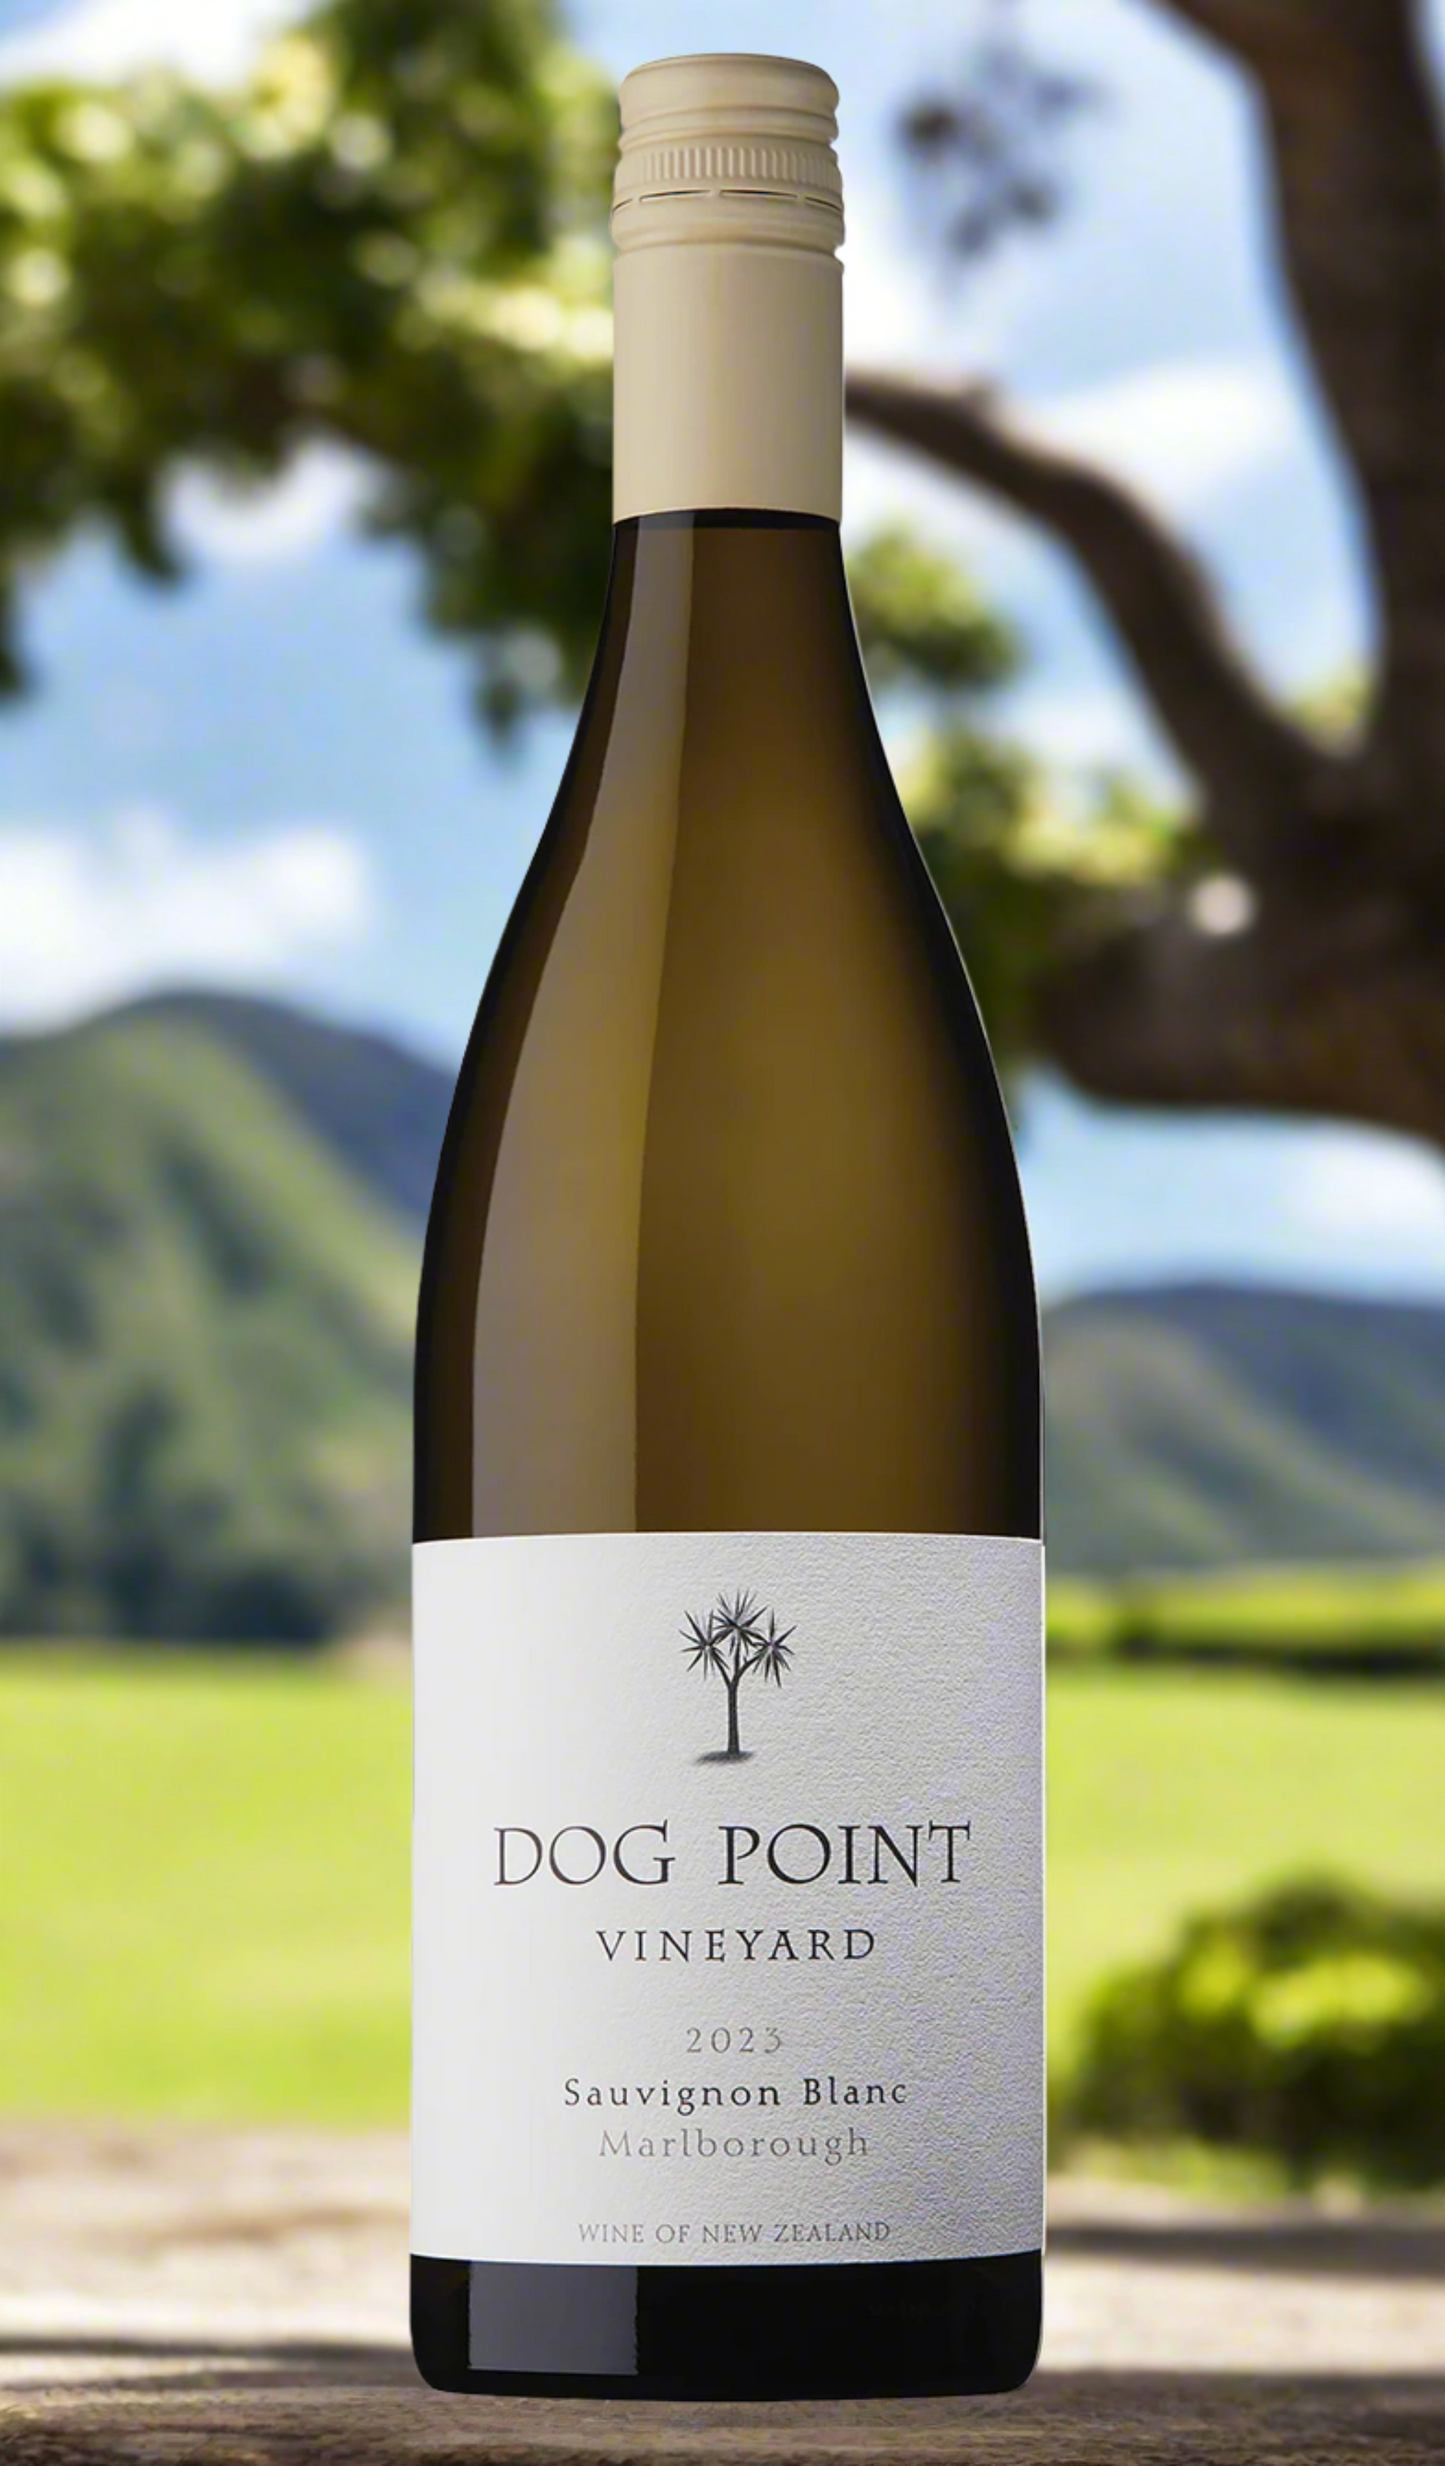 Find out more or buy Dog Point Sauvignon Blanc 2023 (Marlborough) online at Wine Sellers Direct - Australia’s independent liquor specialists.